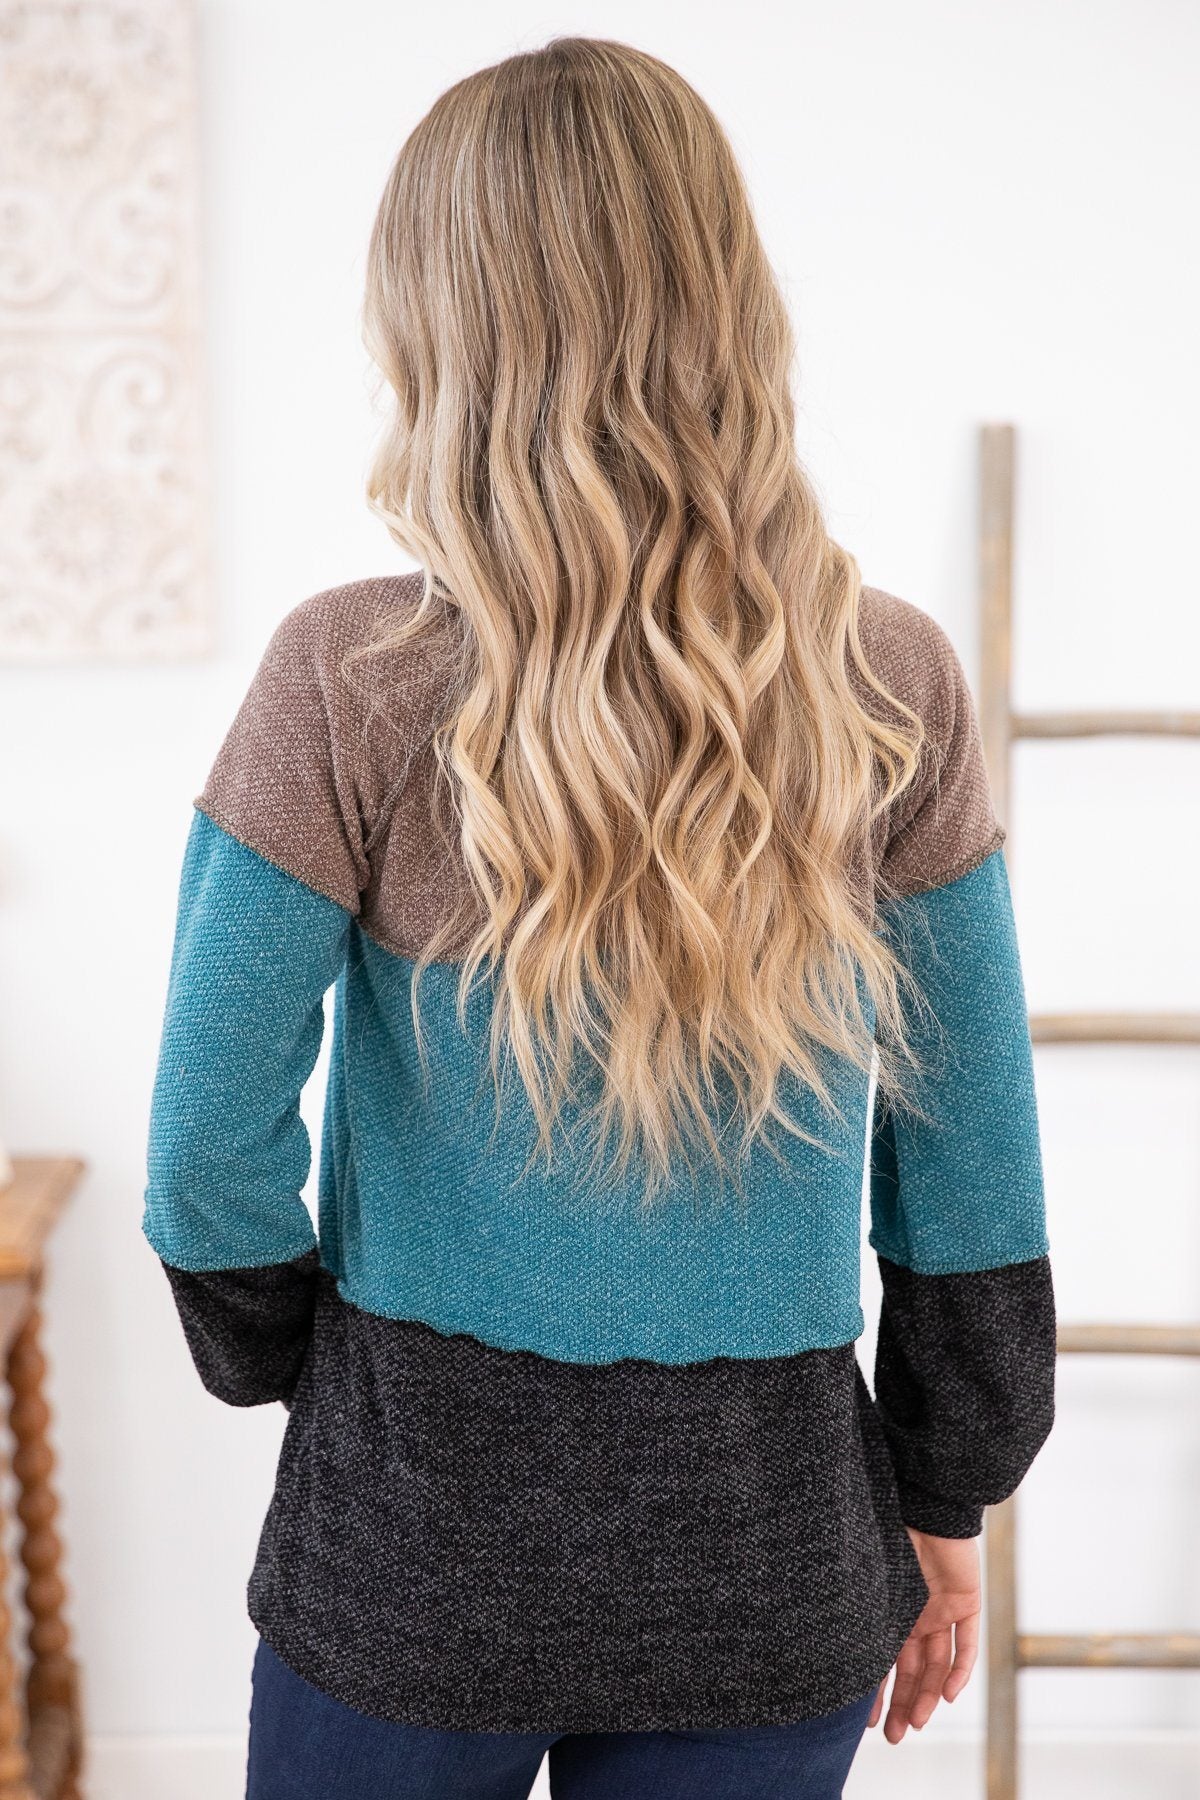 Mocha and Turquoise Colorblock Top - Filly Flair